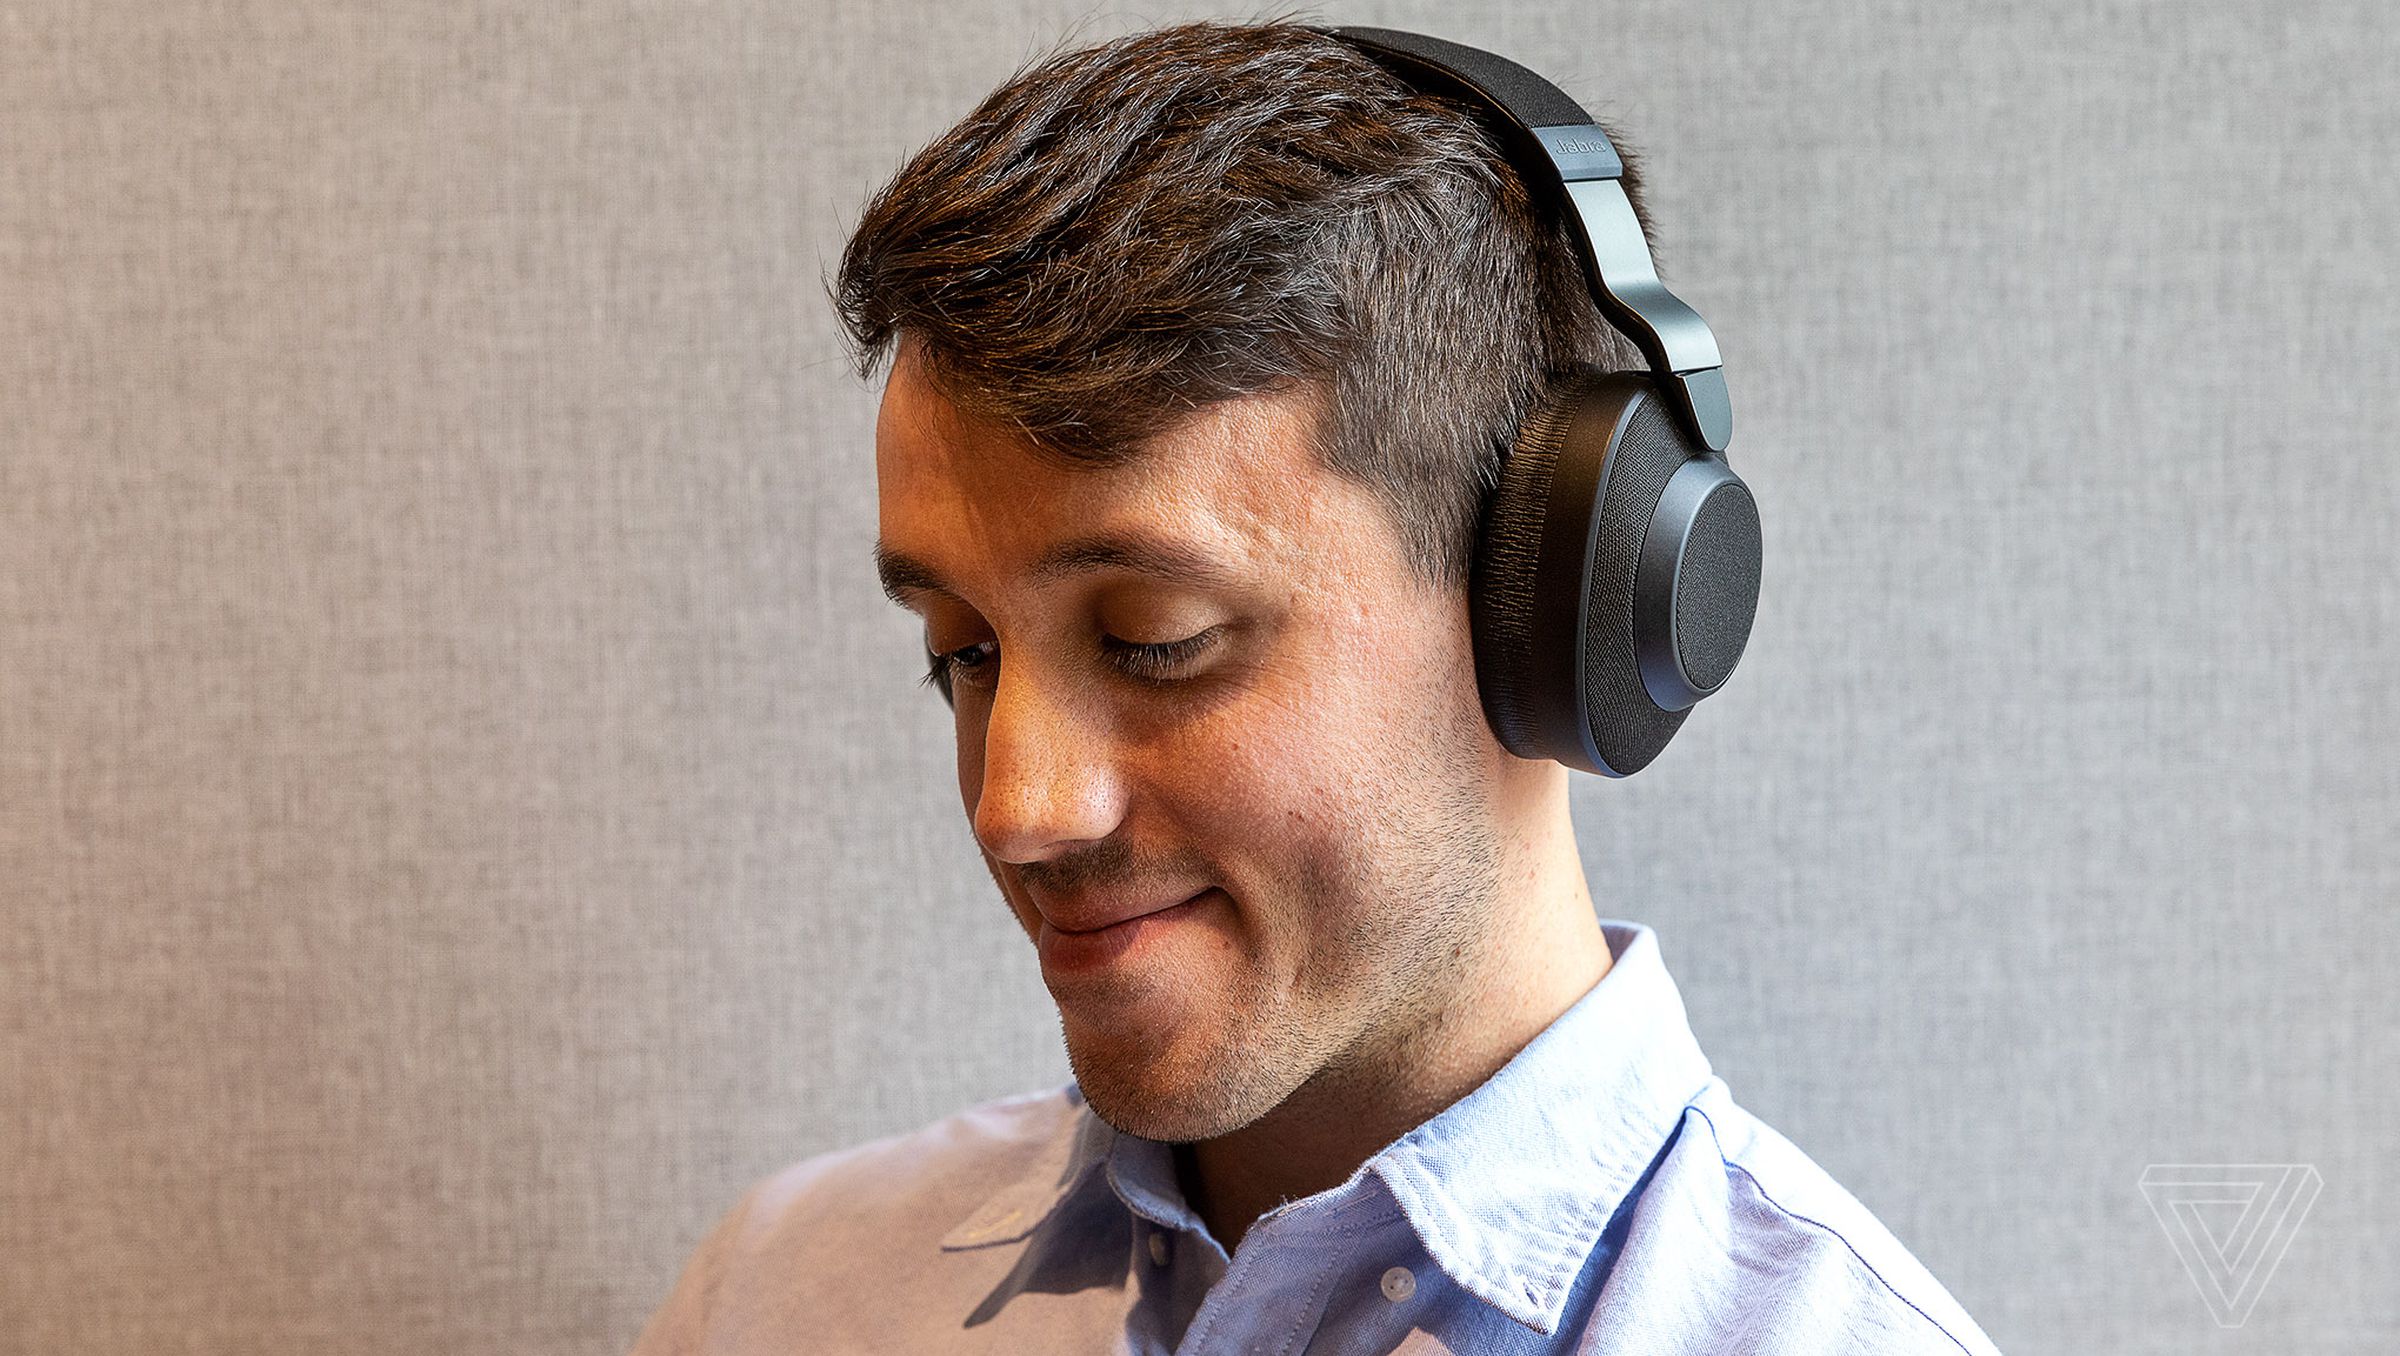 Lyrical Charles Keasing overlap Jabra Elite 85h review: like the rest, but not the best - The Verge